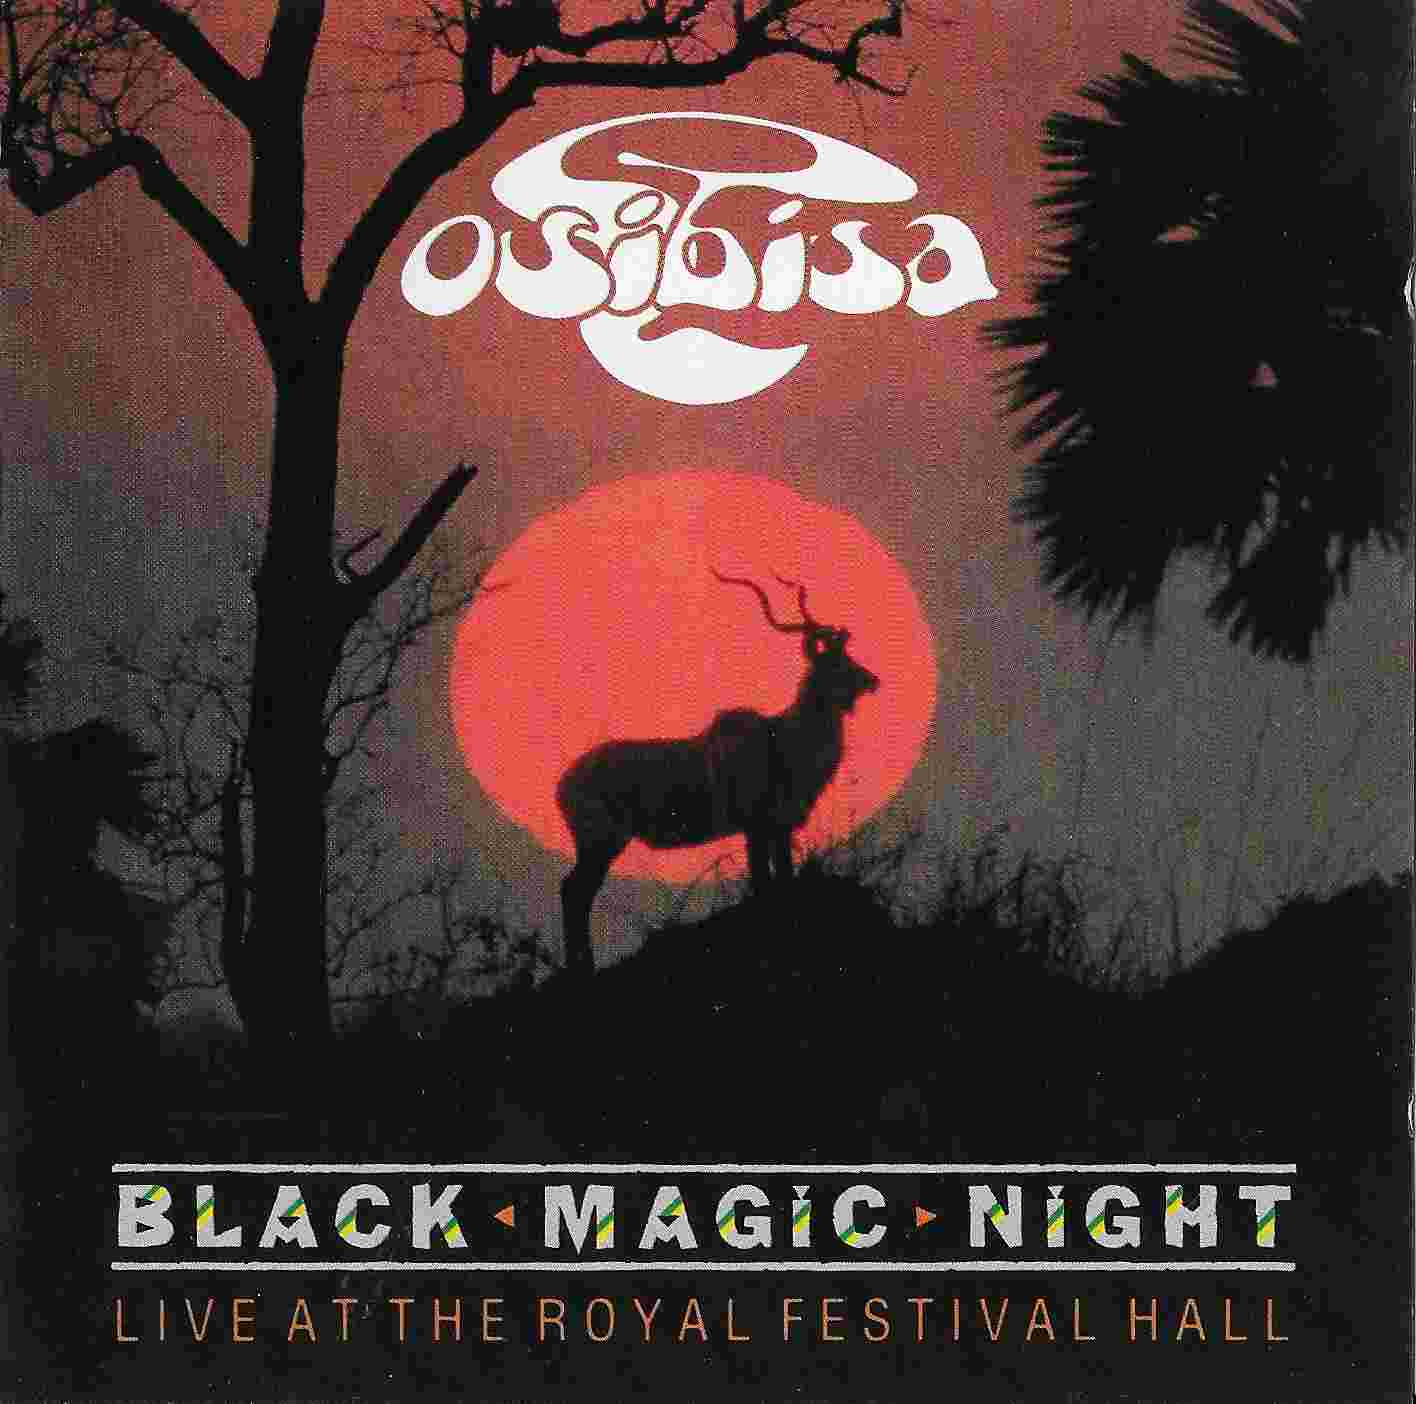 Picture of BBCCD777 Black magic night - Osibisa by artist Osibisa from the BBC cds - Records and Tapes library